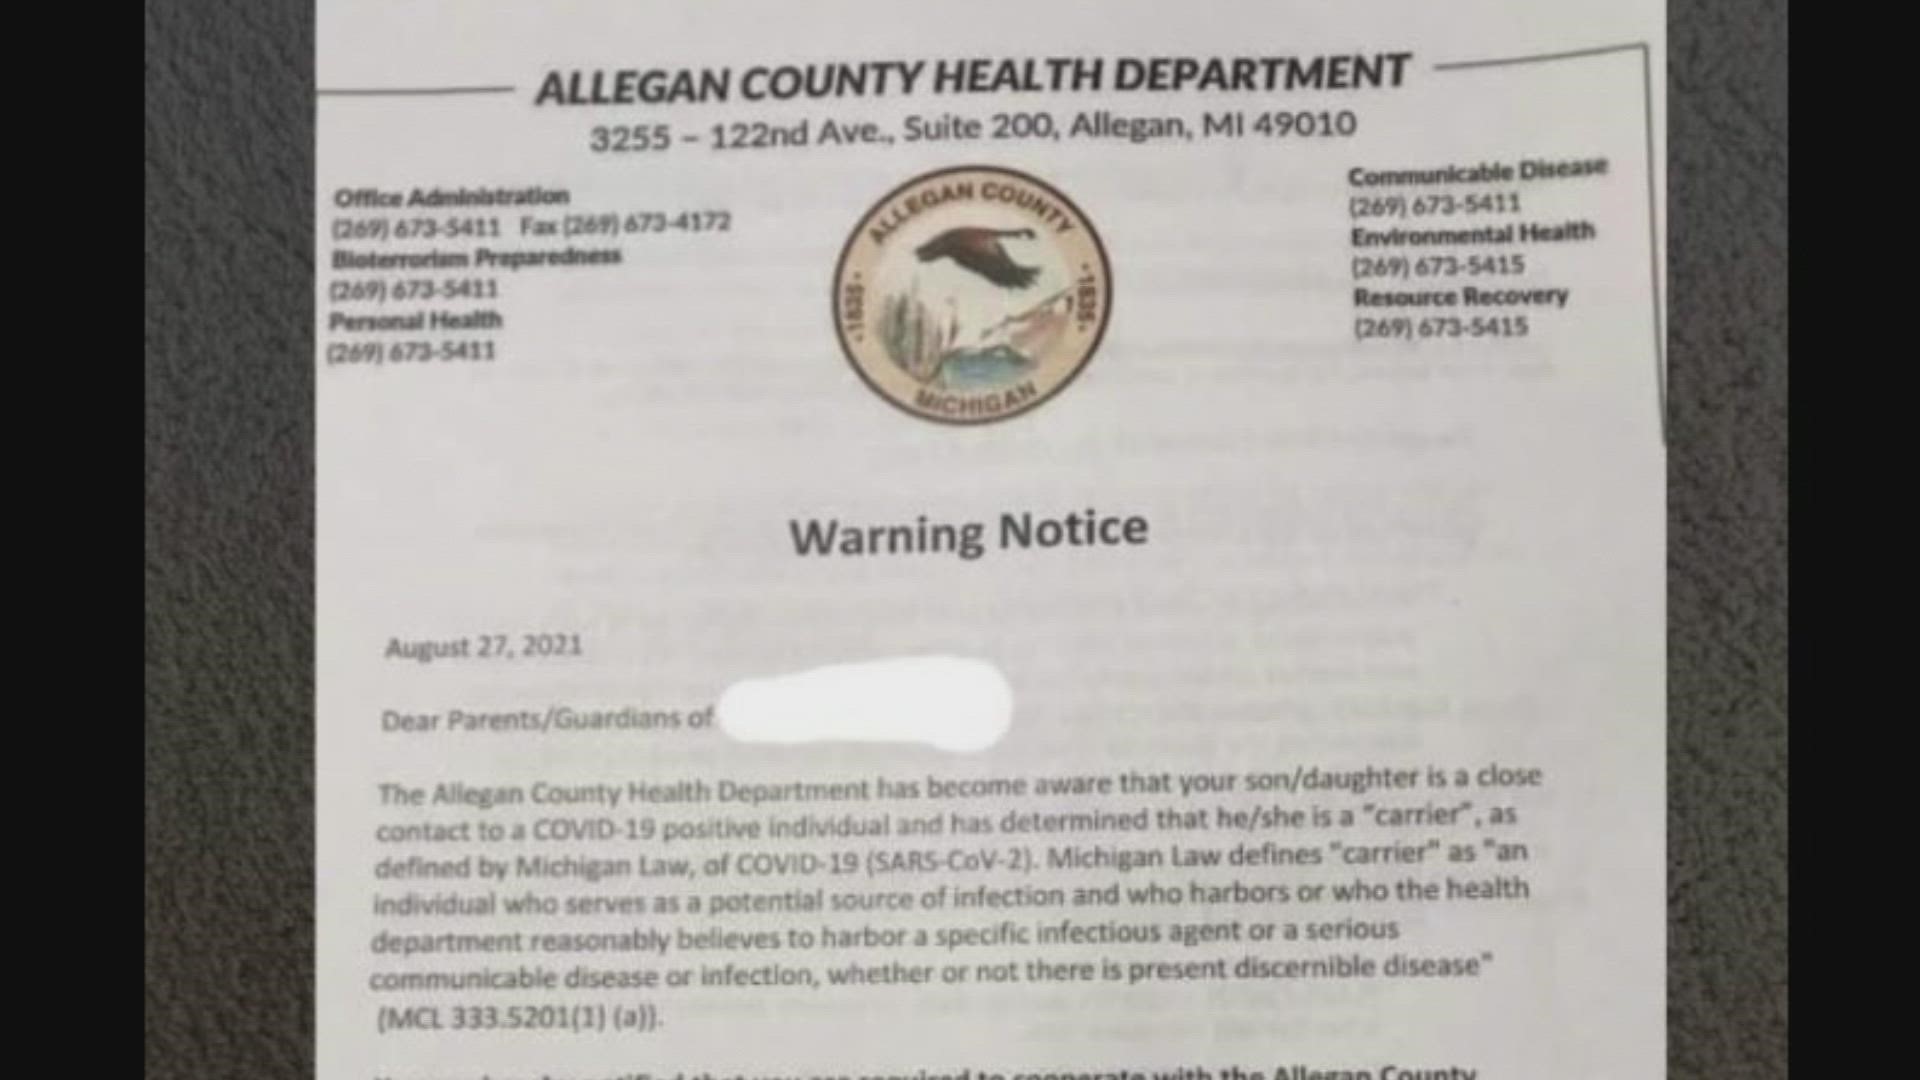 Many are calling for the Allegan Co. Health Director to resign.